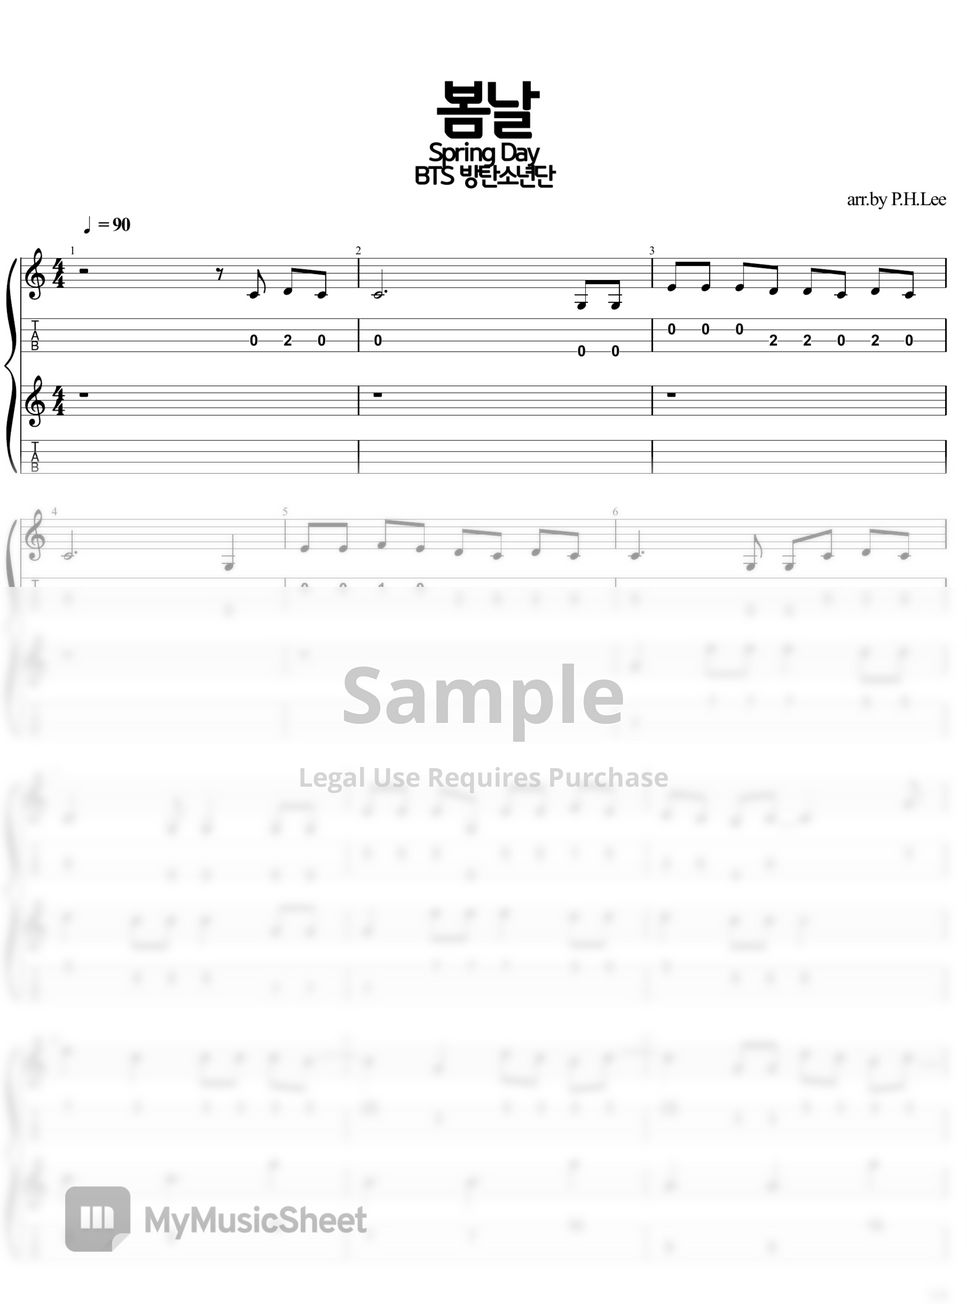 BTS - Spring Day (1st,2nd,3rd,4th) Ukulele TAB by P3